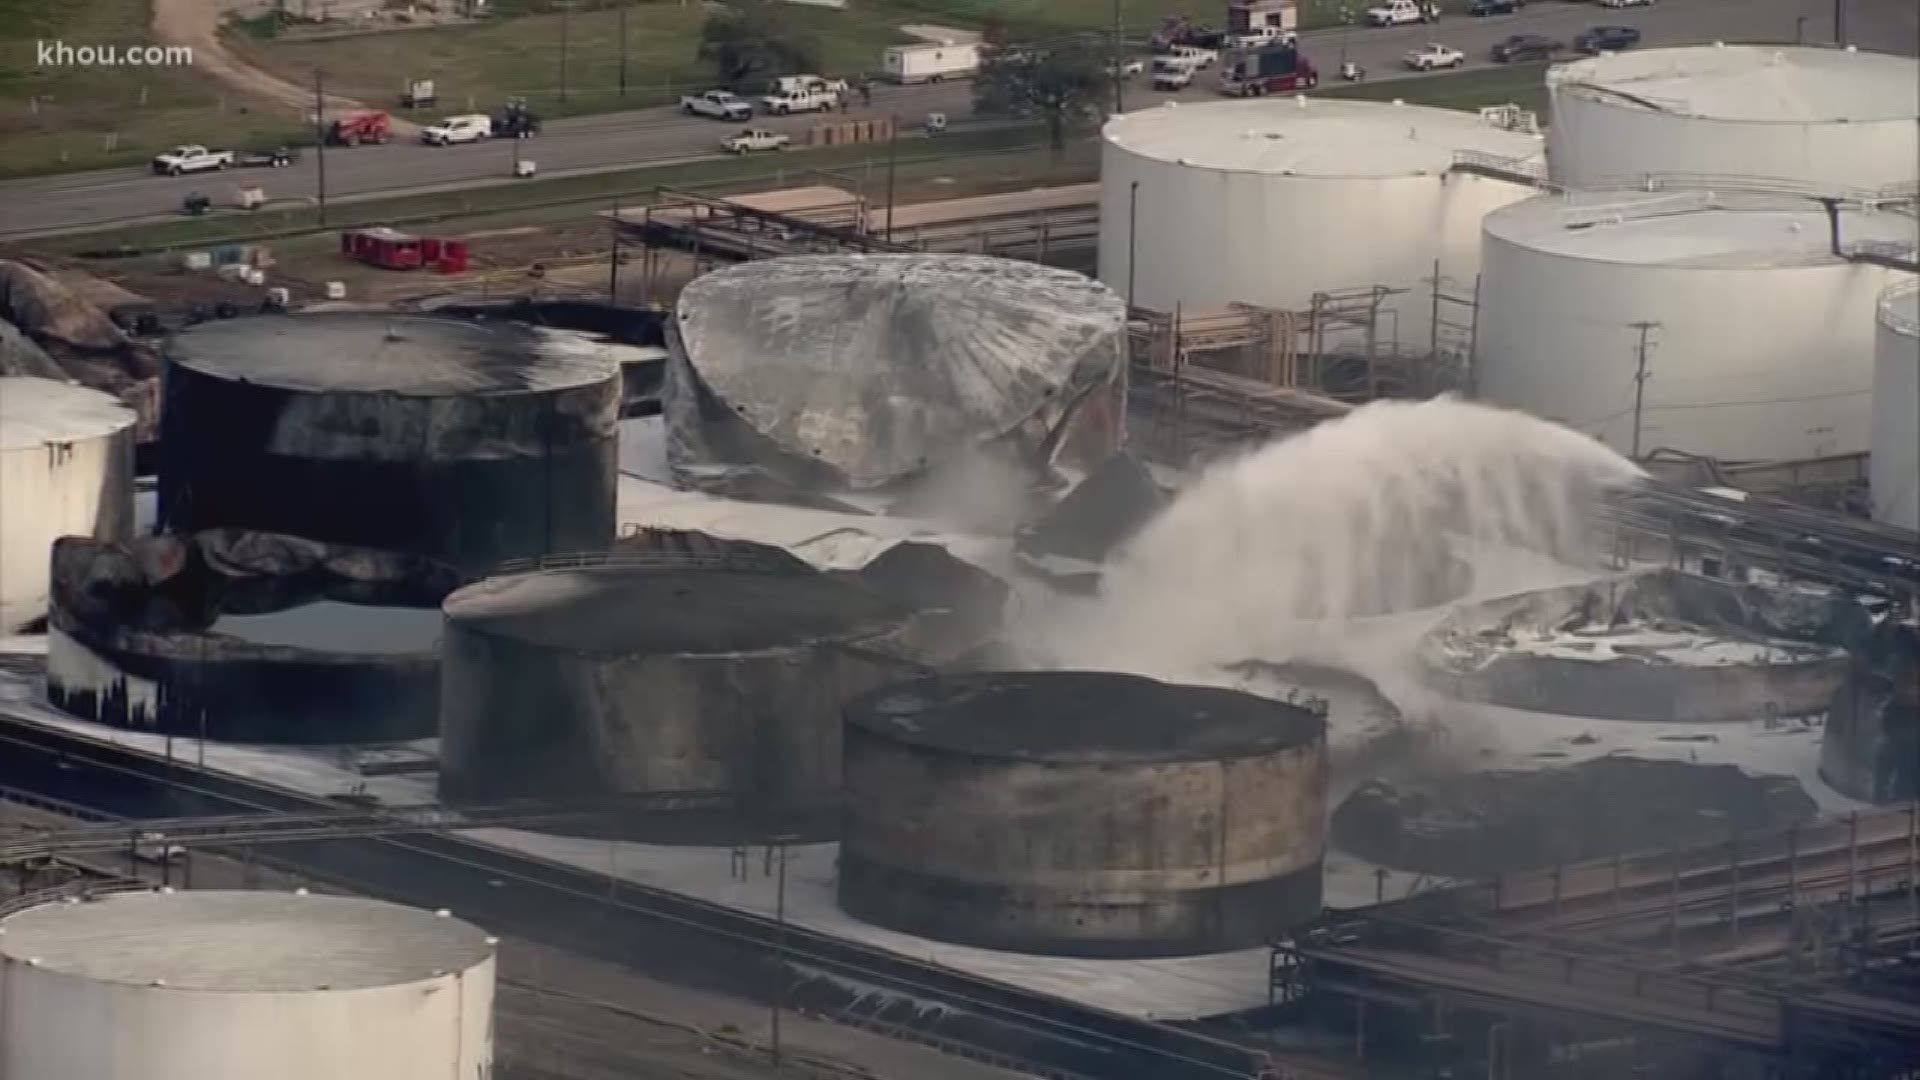 Crews are currently working to empty an ITC storage tank that they believe emitted dangerous benzene vapors that led authorities to ask residents to remain indoors for several hours on Thursday.